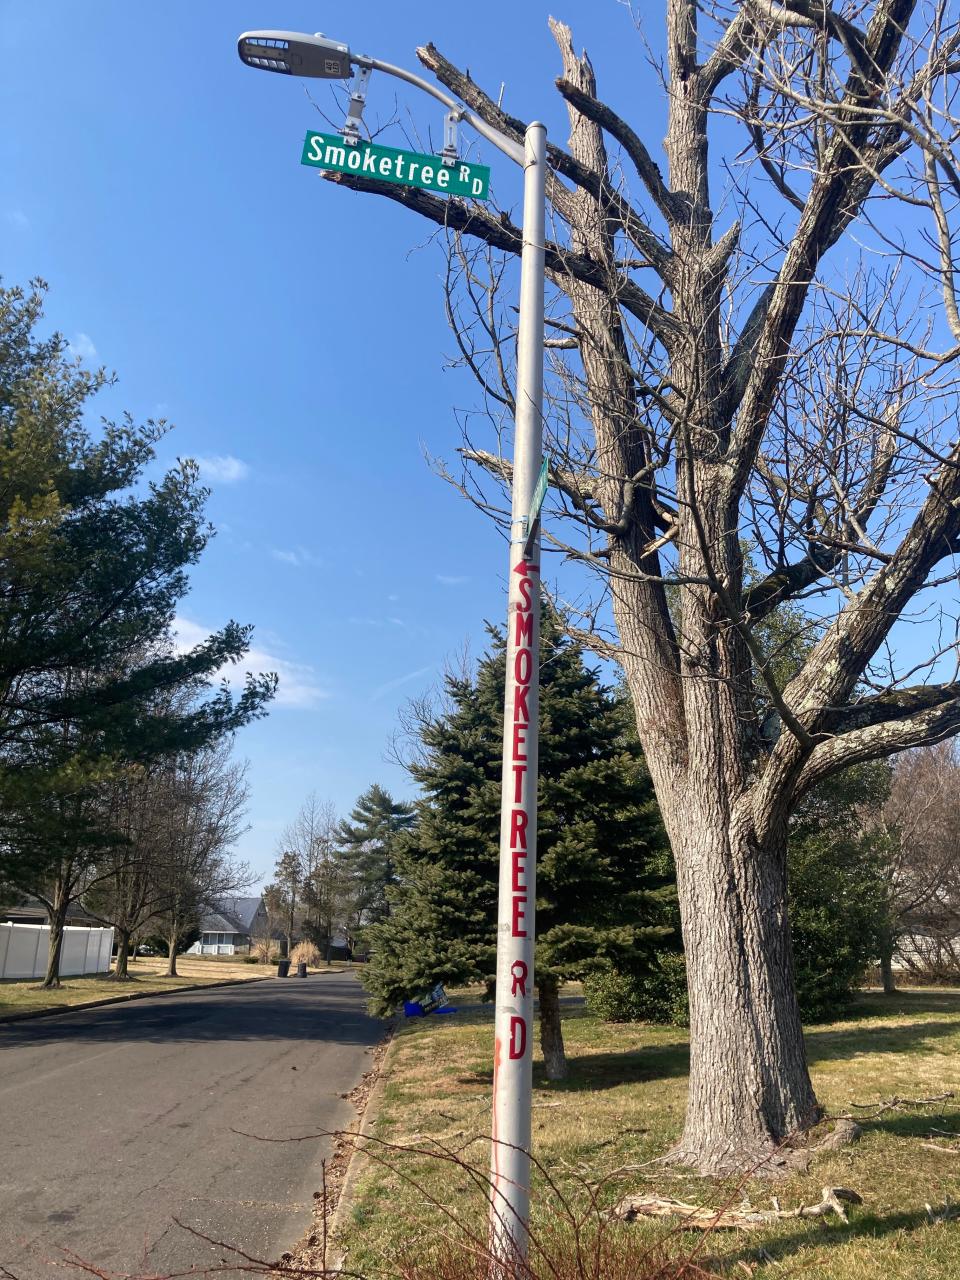 Smoketree Road in Snowball Gate is probably the most stolen street sign in Levittown. Middletown even greased the poles to keep thieves away, but finally had to bolt the sign at the top of the light pole, where it has remained untouched for several years.